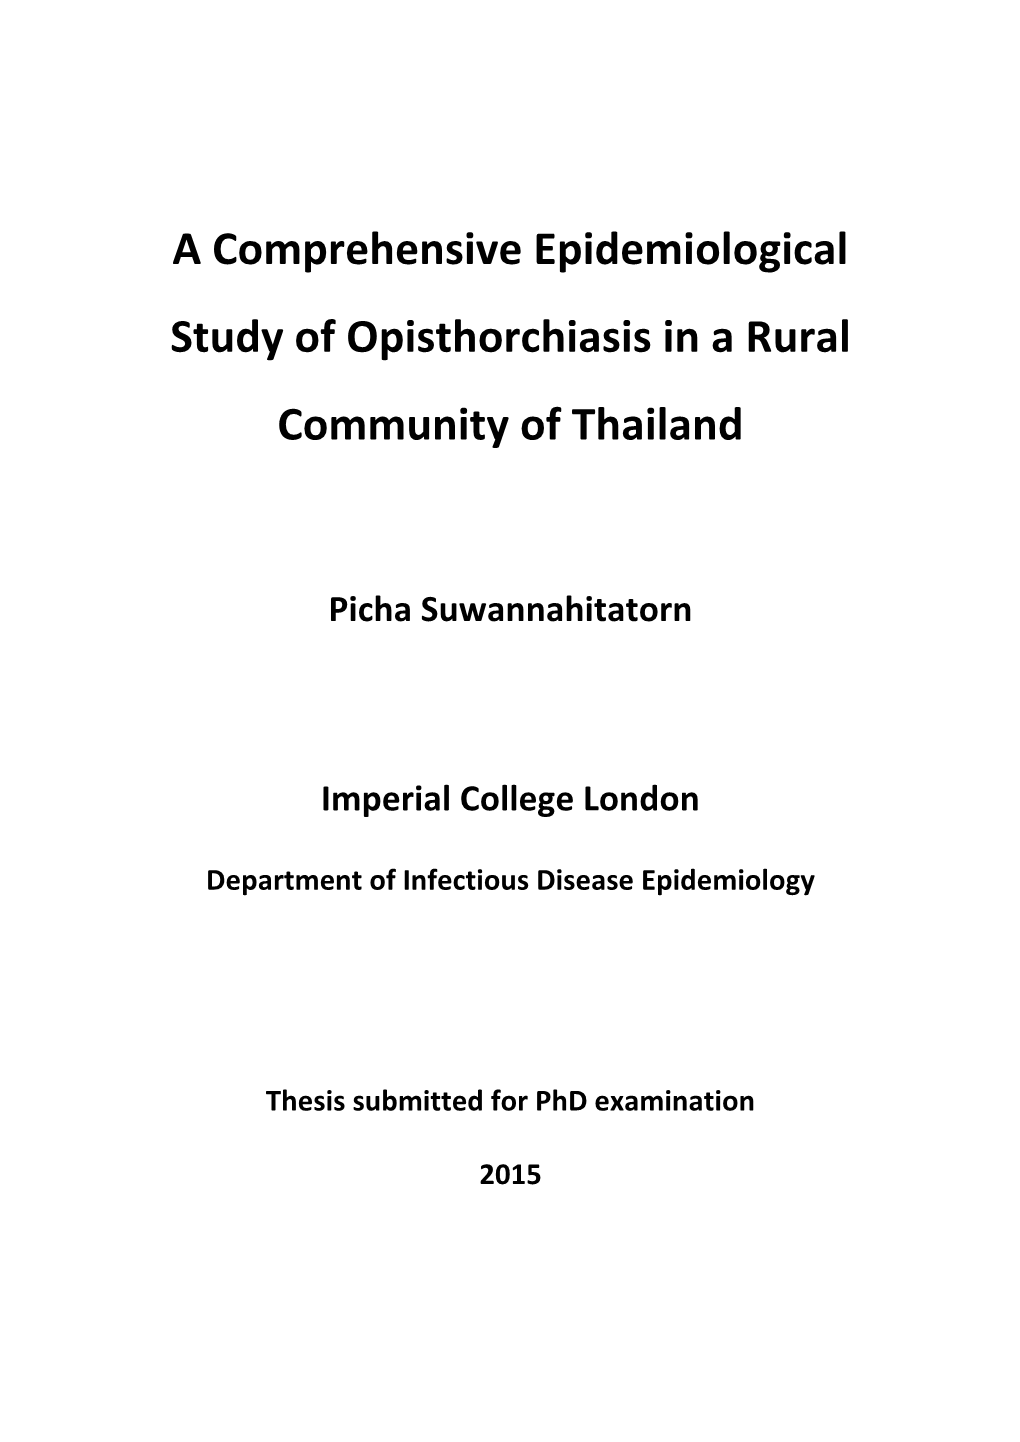 A Comprehensive Epidemiological Study of Opisthorchiasis in a Rural Community of Thailand